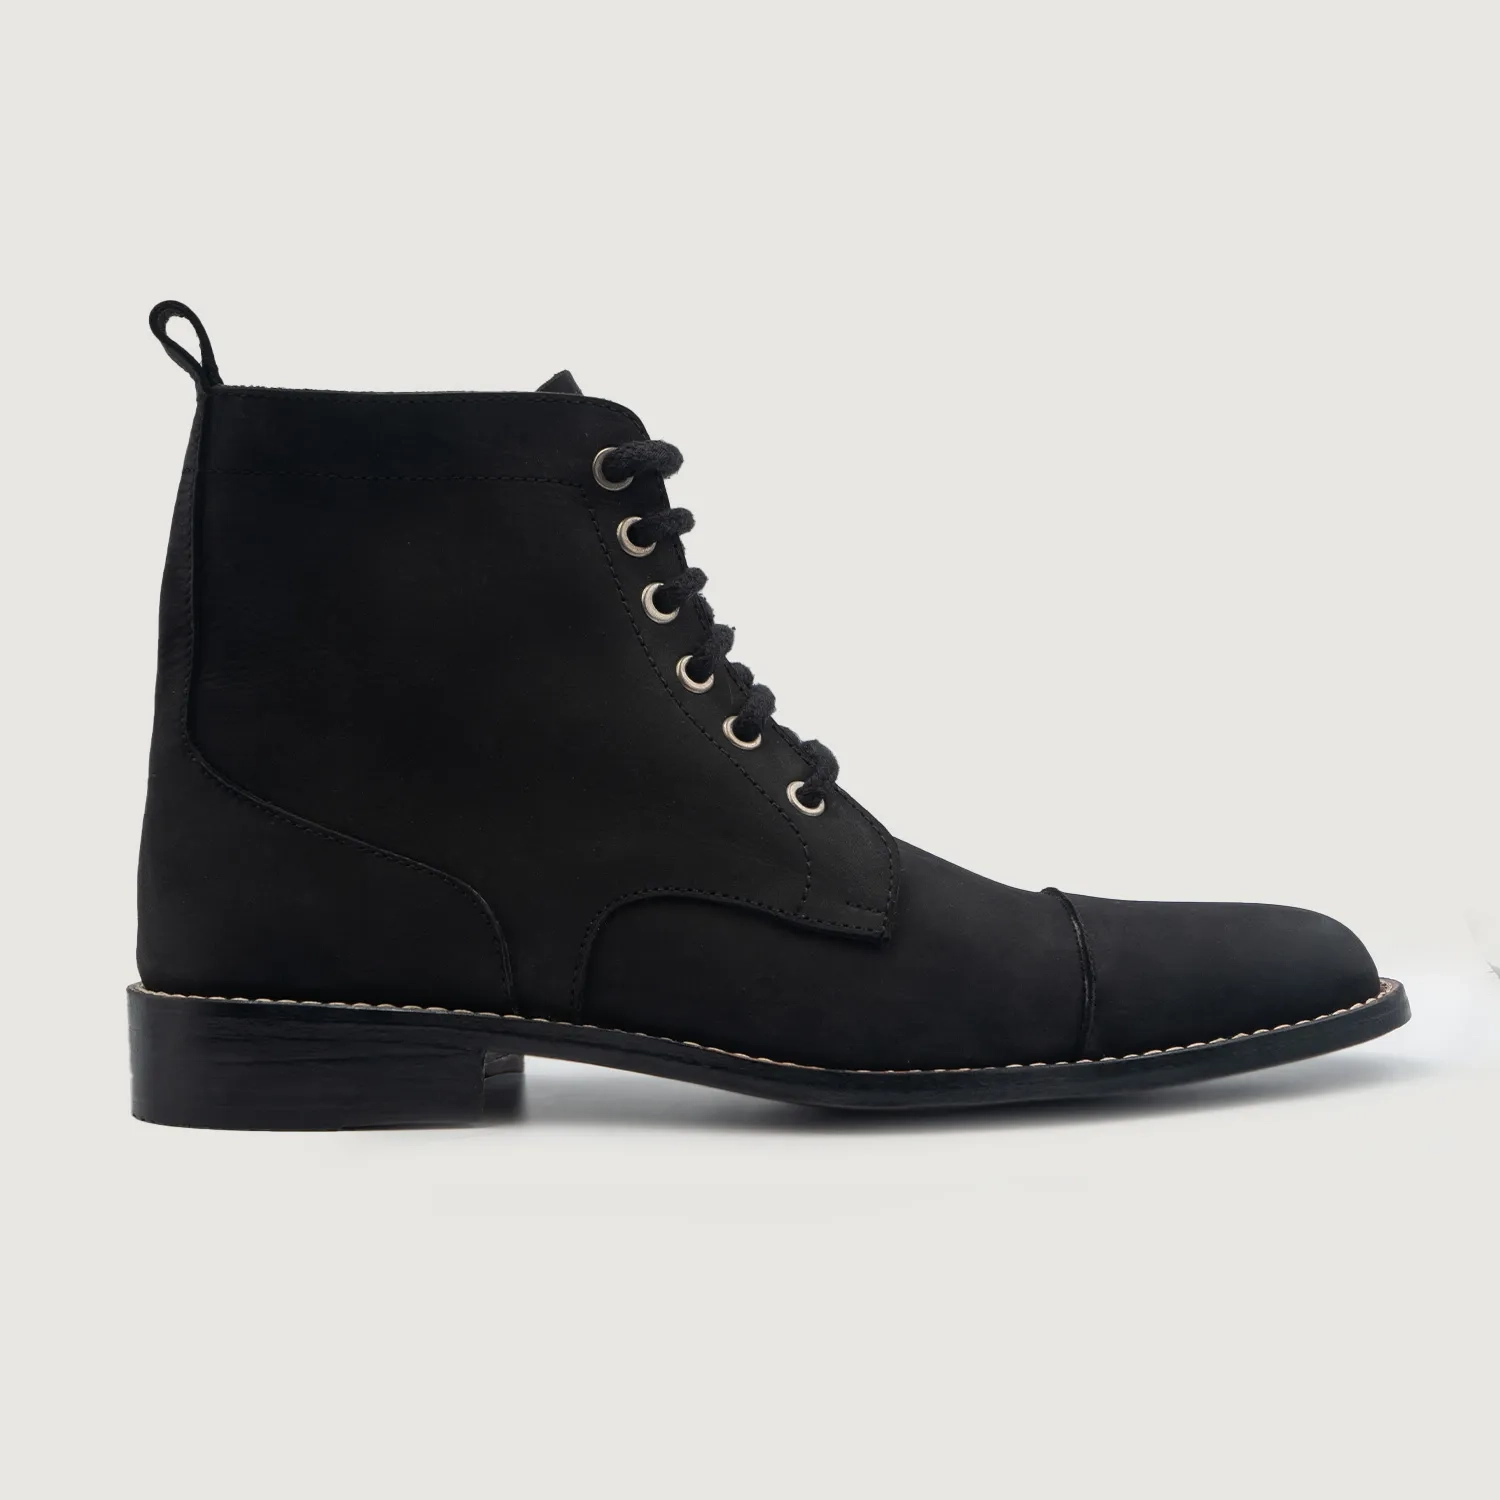 Knight Derby Black Nubuck Leather Boots